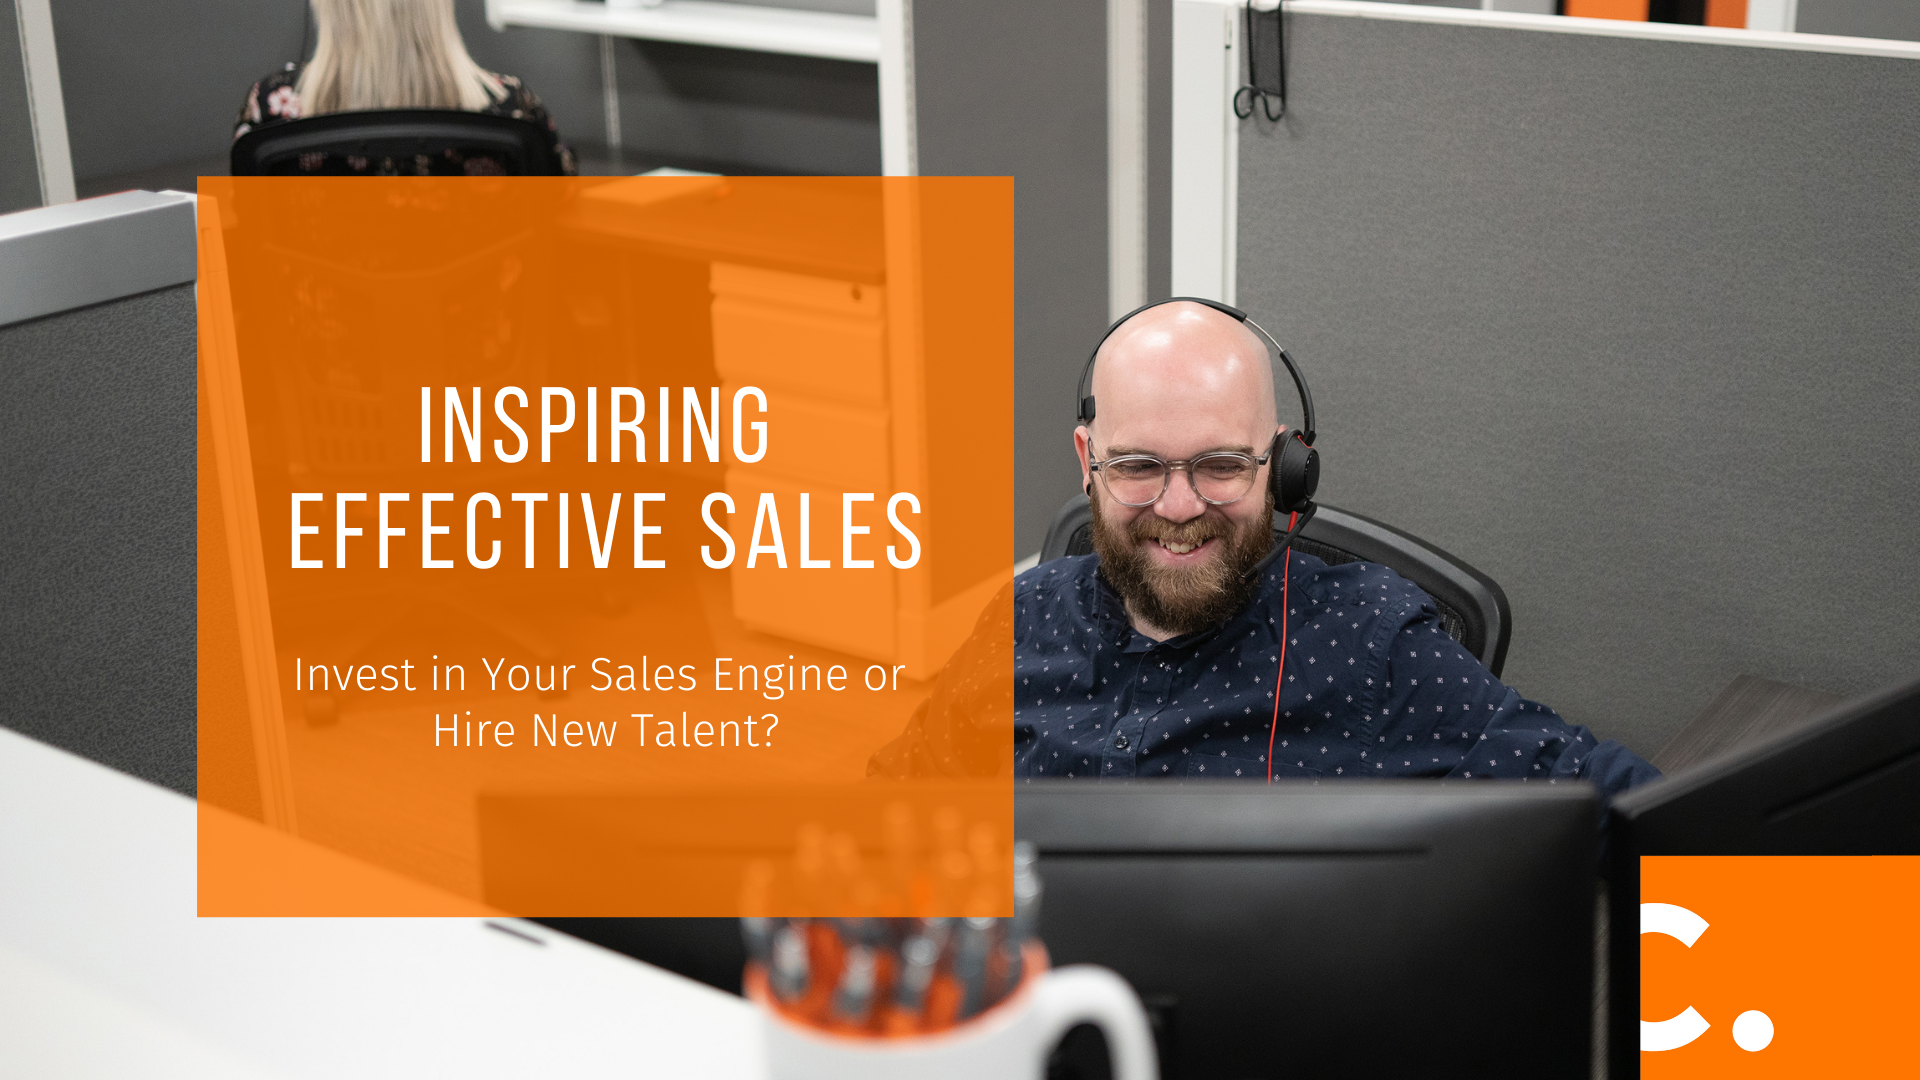 Read these tips on inspiring sales effectively